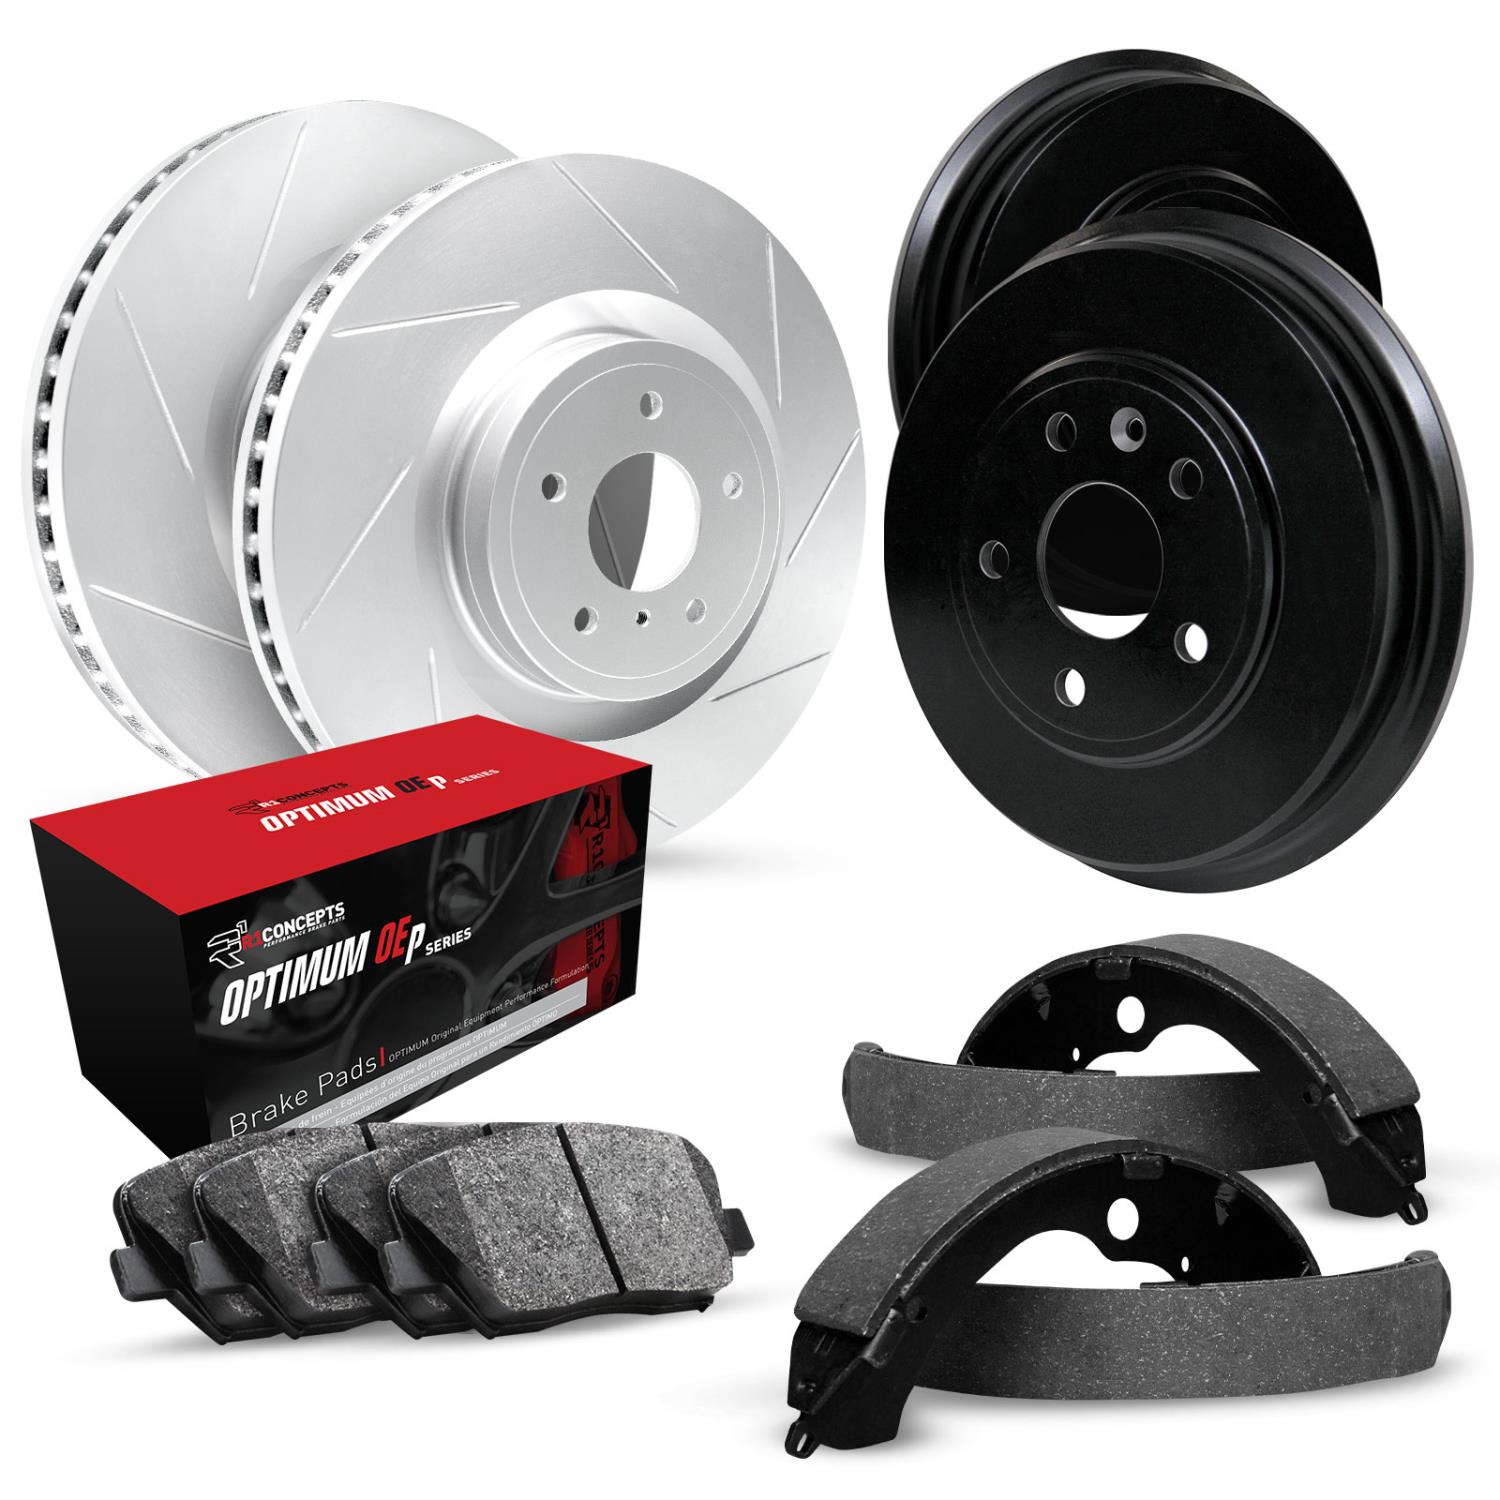 GEO-Carbon Slotted Brake Rotor & Drum Set w/Optimum OE Pads & Shoes, 1997-1999 Ford/Lincoln/Mercury/Mazda